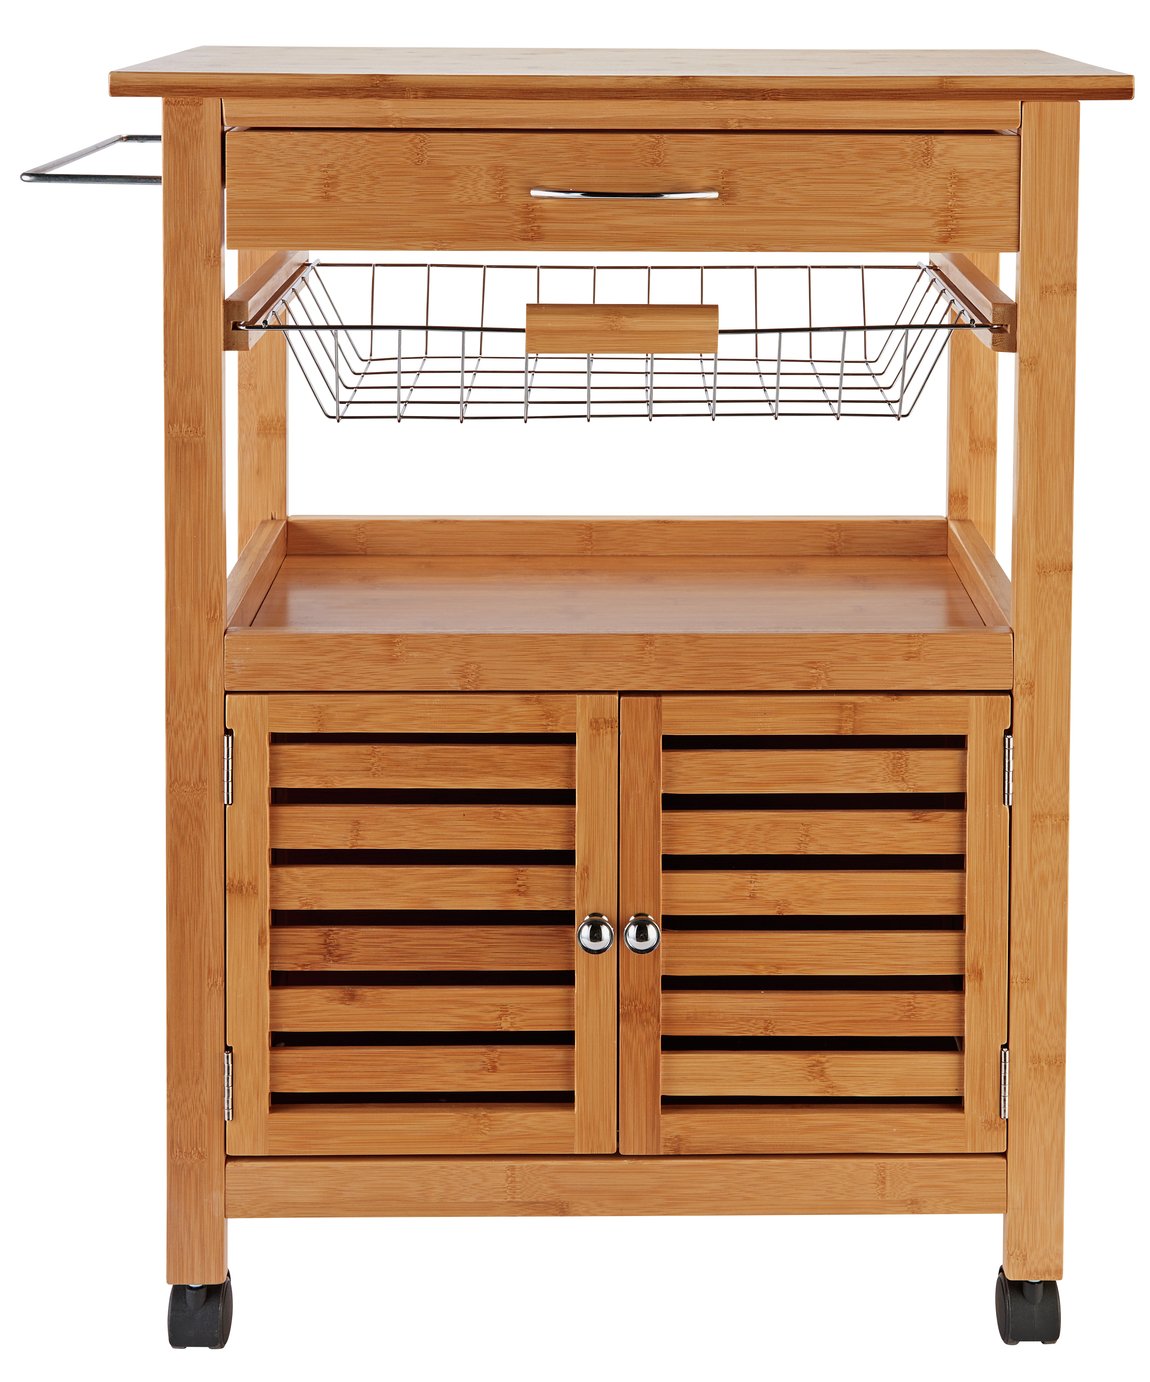 Argos Home Wood Effect Top Trolley with Basket